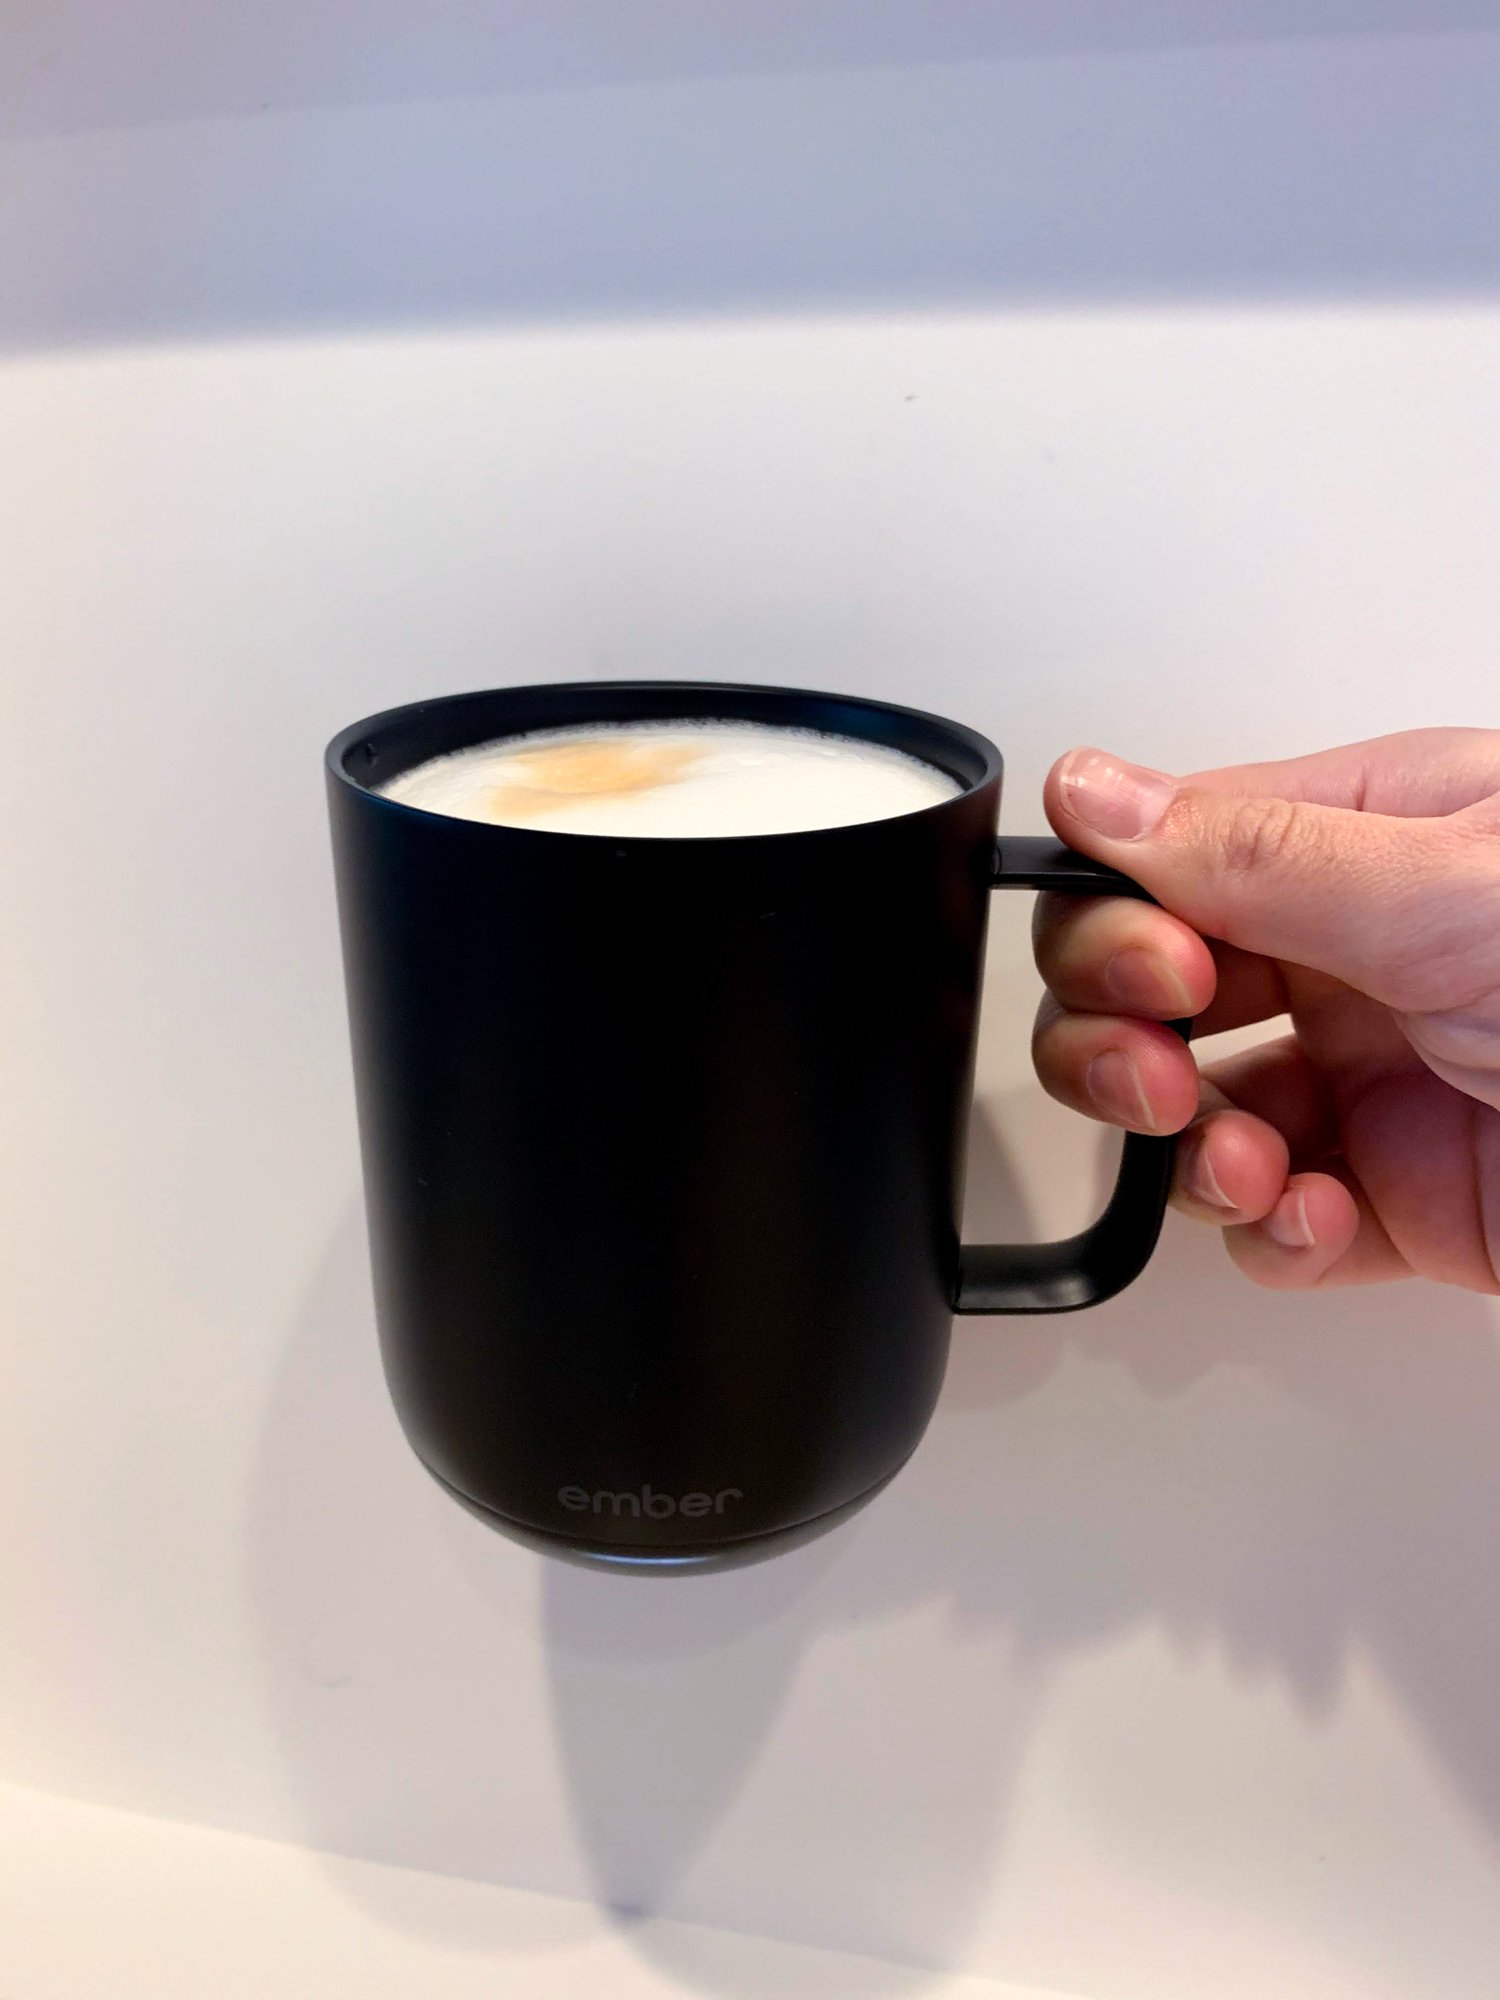 Is The $100 Ember Temperature Control Smart Mug Worth it?